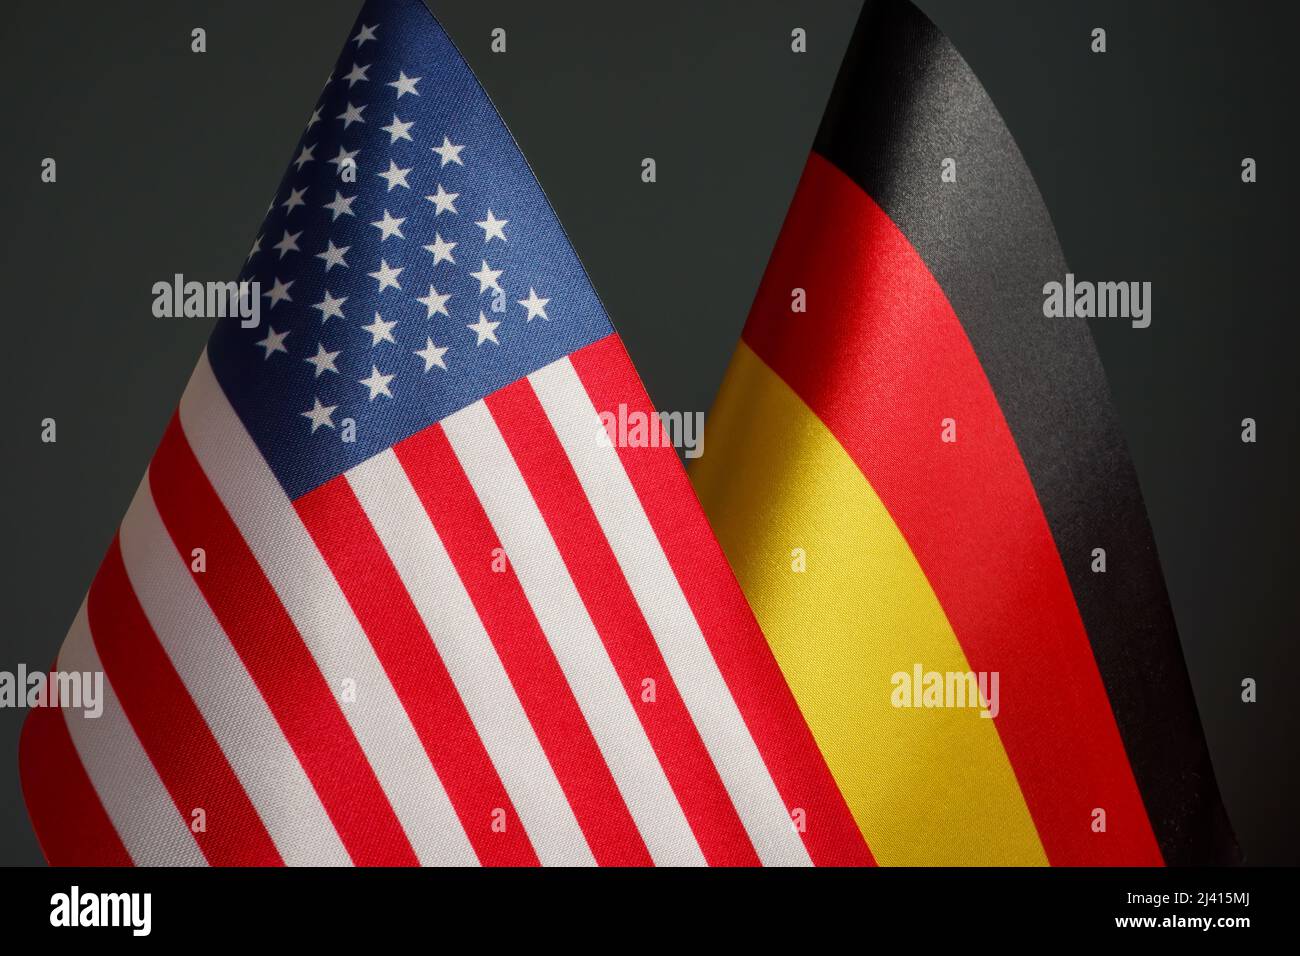 Flags of the USA and Germany as a symbol of political relations. Stock Photo